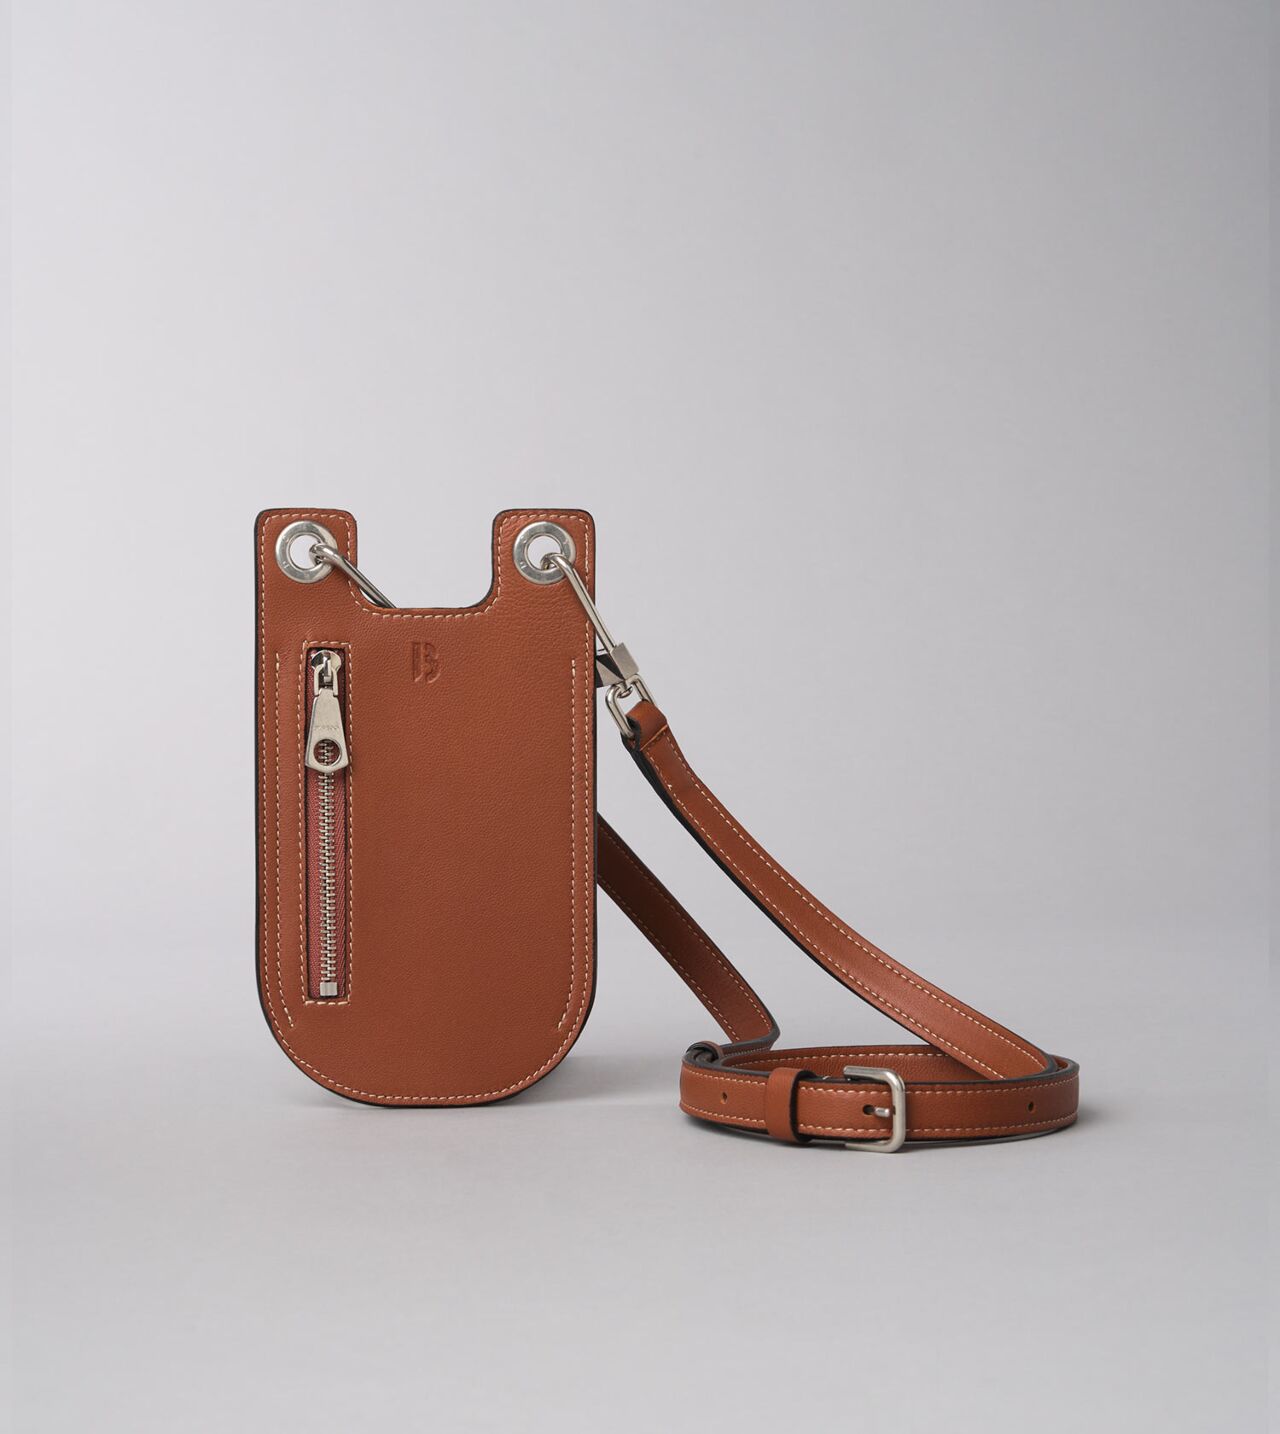 Leather Phone Holder in Saddle Tan